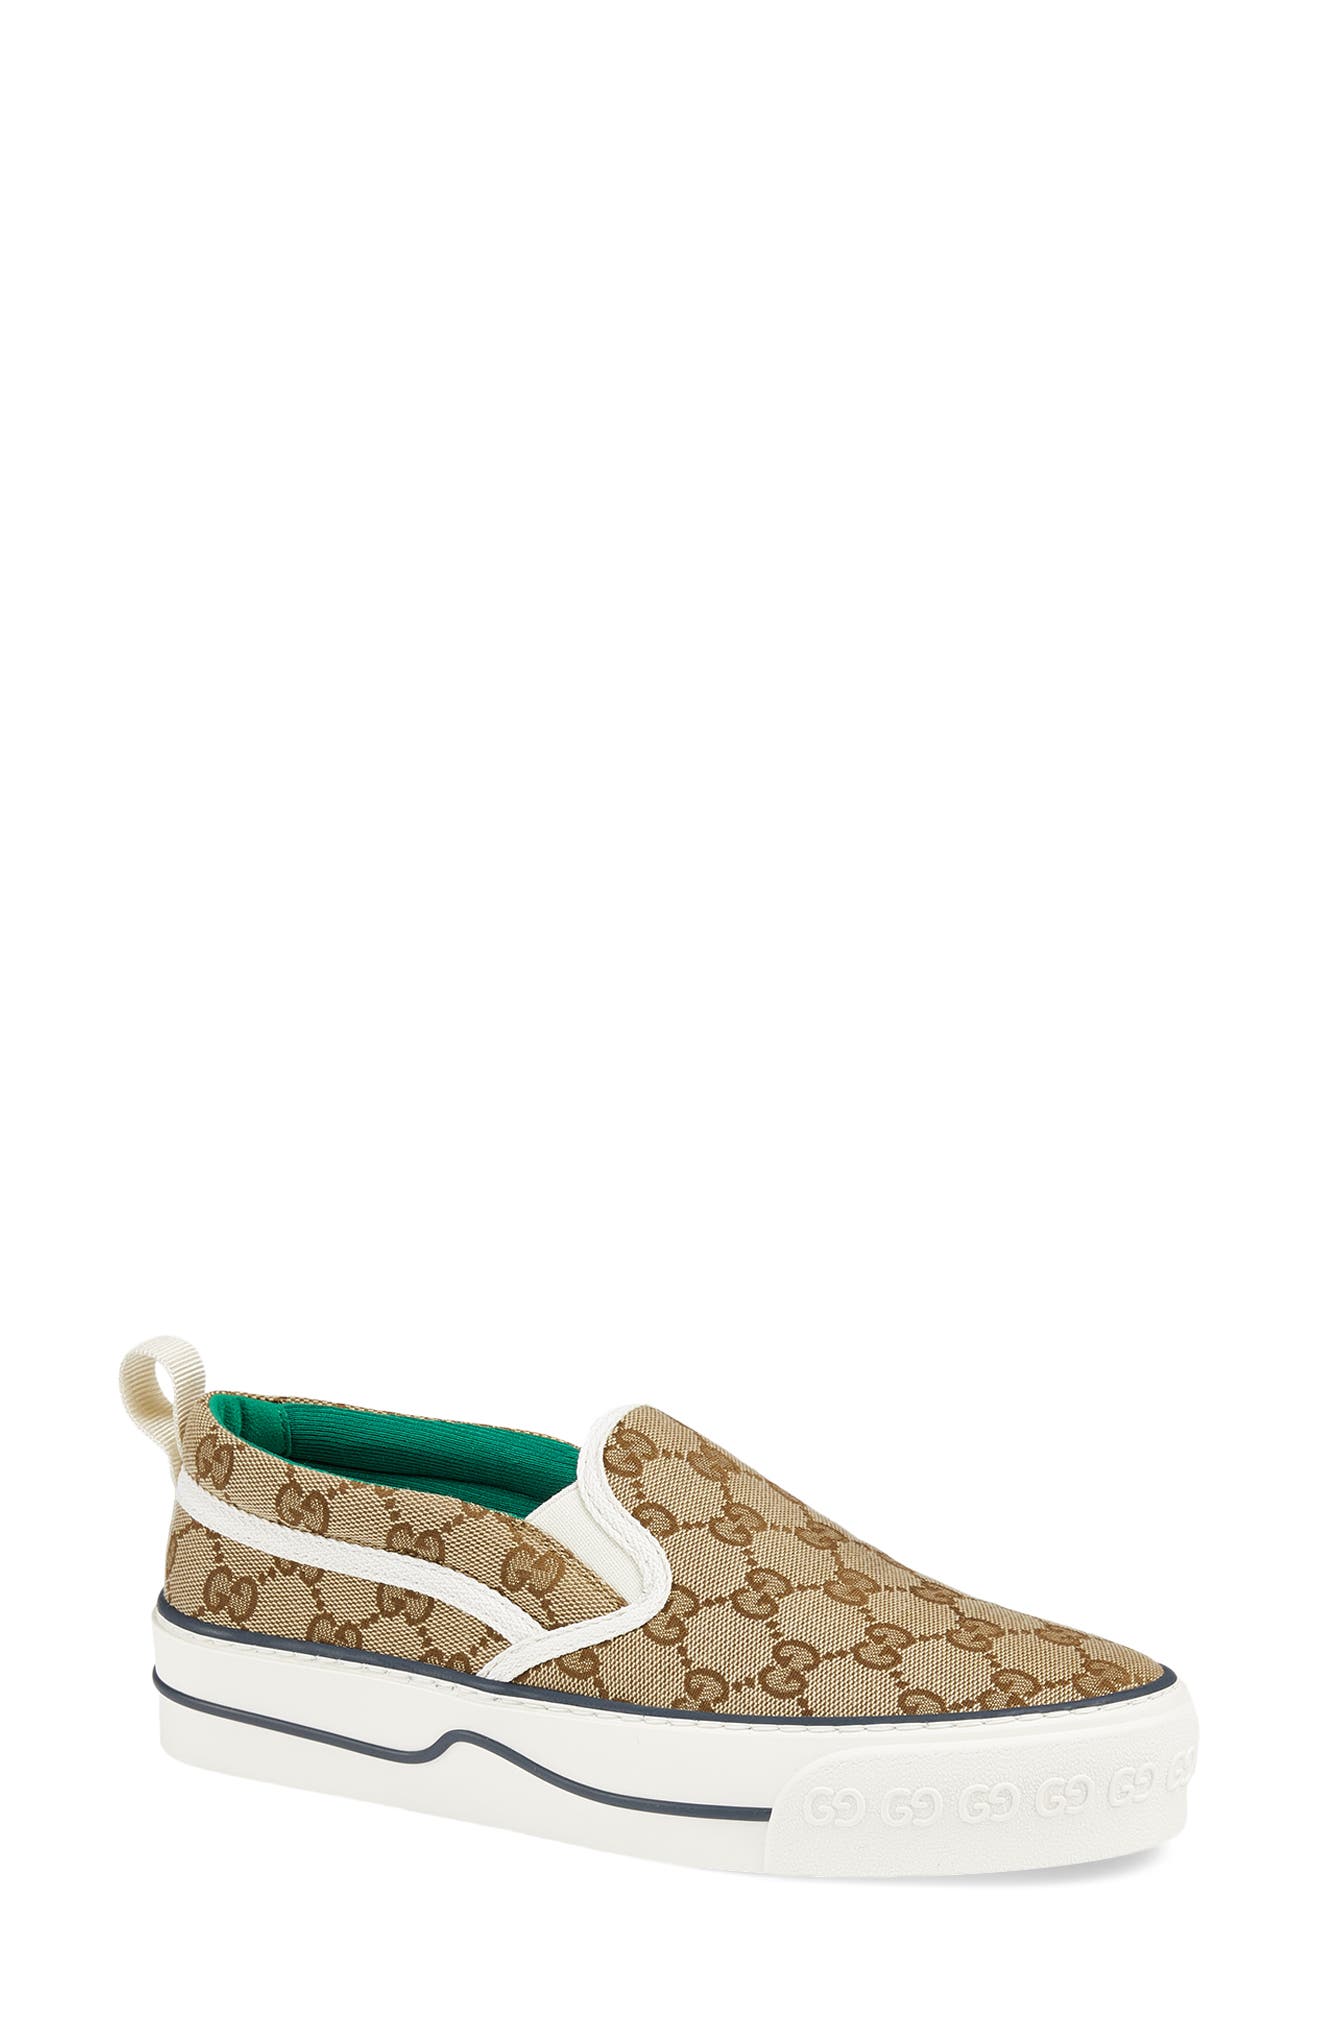 gucci slip ons for women - Cheap Price - OFF 72%